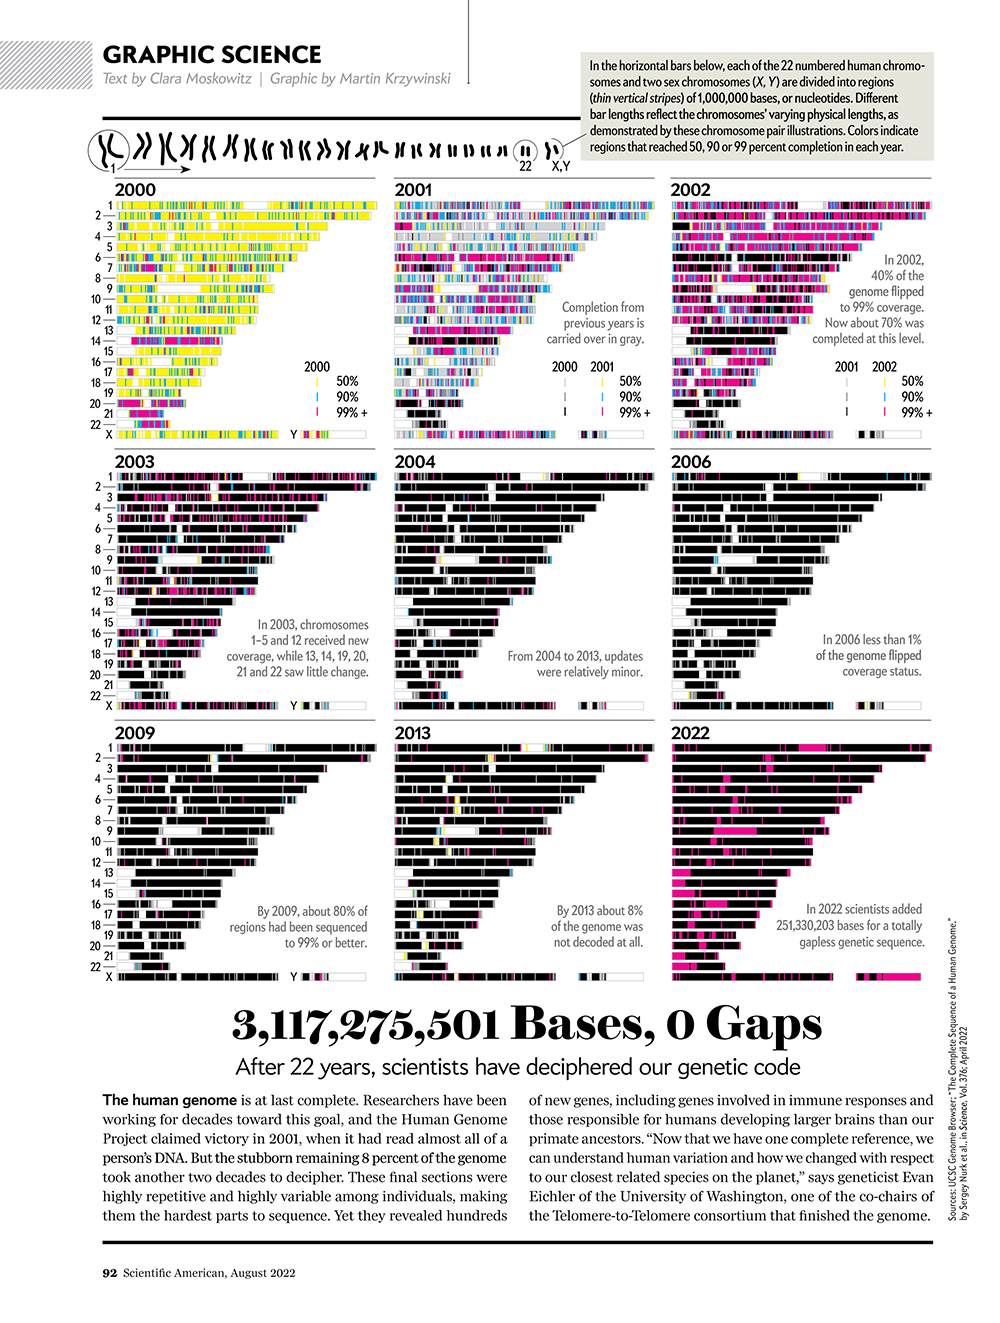 History of the Human Genome Assembly (22 years, 3,117,275,501 bases and 0 gaps later) -- science + art + data visualization / Martin Krzywinski / Martin Krzywinski @MKrzywinski mkweb.bcgsc.ca